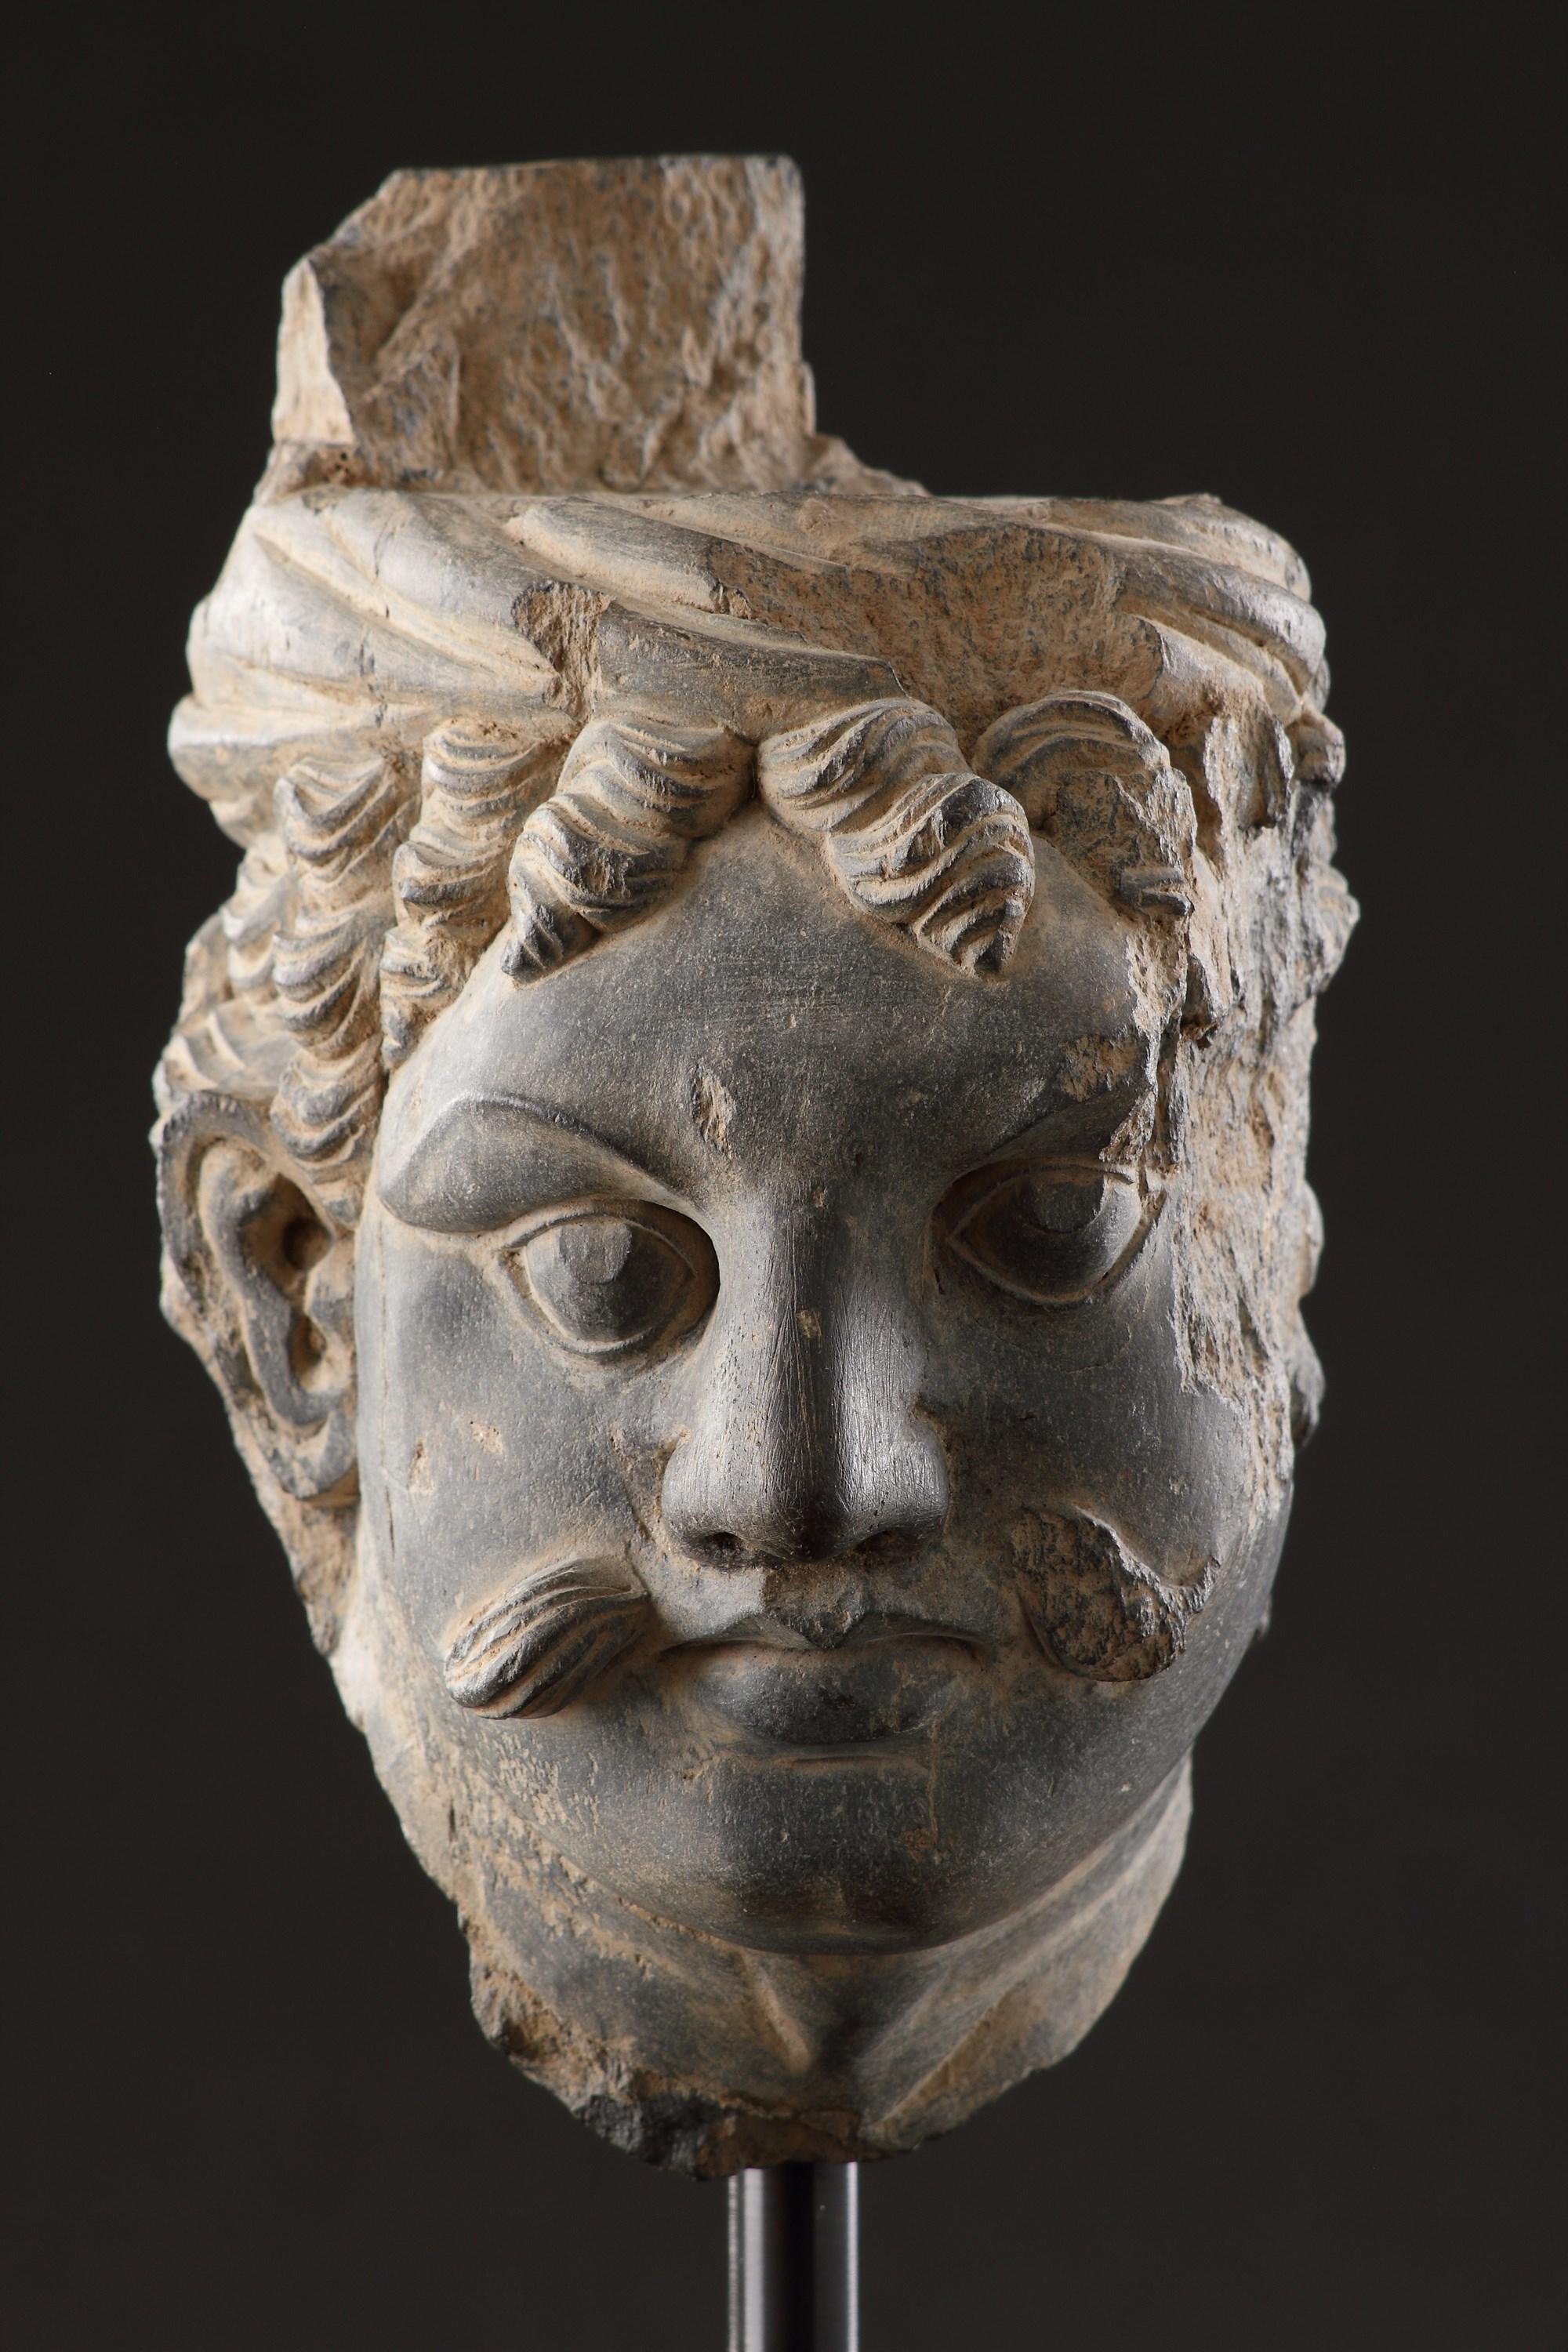 A Finely Carved Gandhara Head of ‘Atlas’
Grey schist
India
3rd - 4th Centuries AD

SIZE: 19cm high, 11cm wide, 12.5cm deep - 7½ ins high, 4¼ ins wide, 5 ins deep

References  
Pratapaditya, Pal; ‘Asian Art at the Norton Simon Museum’, Vol. l; Art